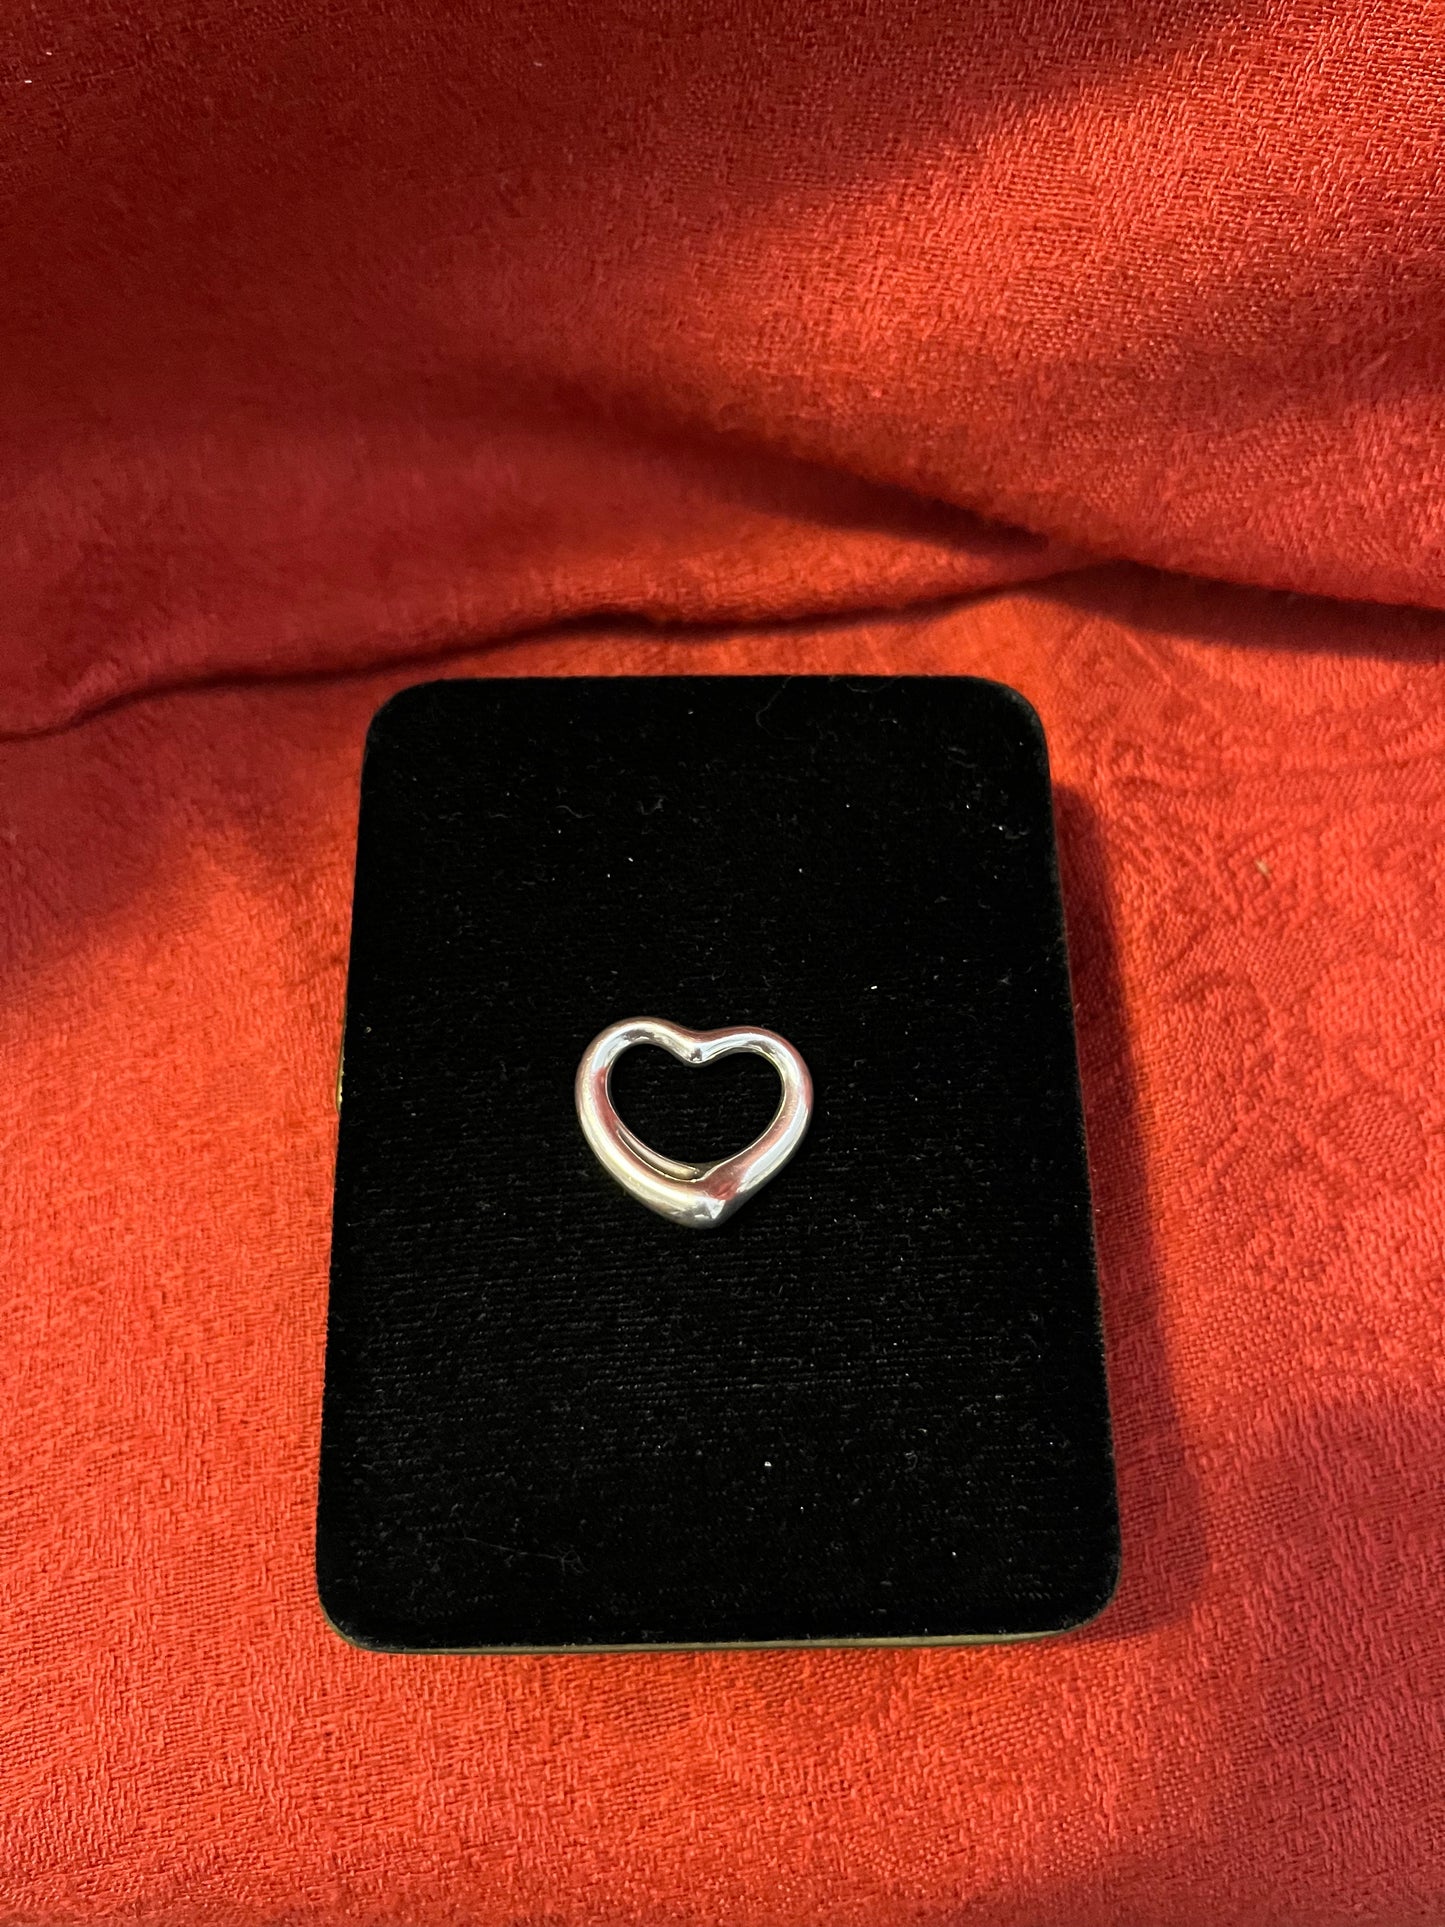 Tiffany & Co Sterling Silver Elsa Peretti Floating Heart Charm-No Box or Pouch